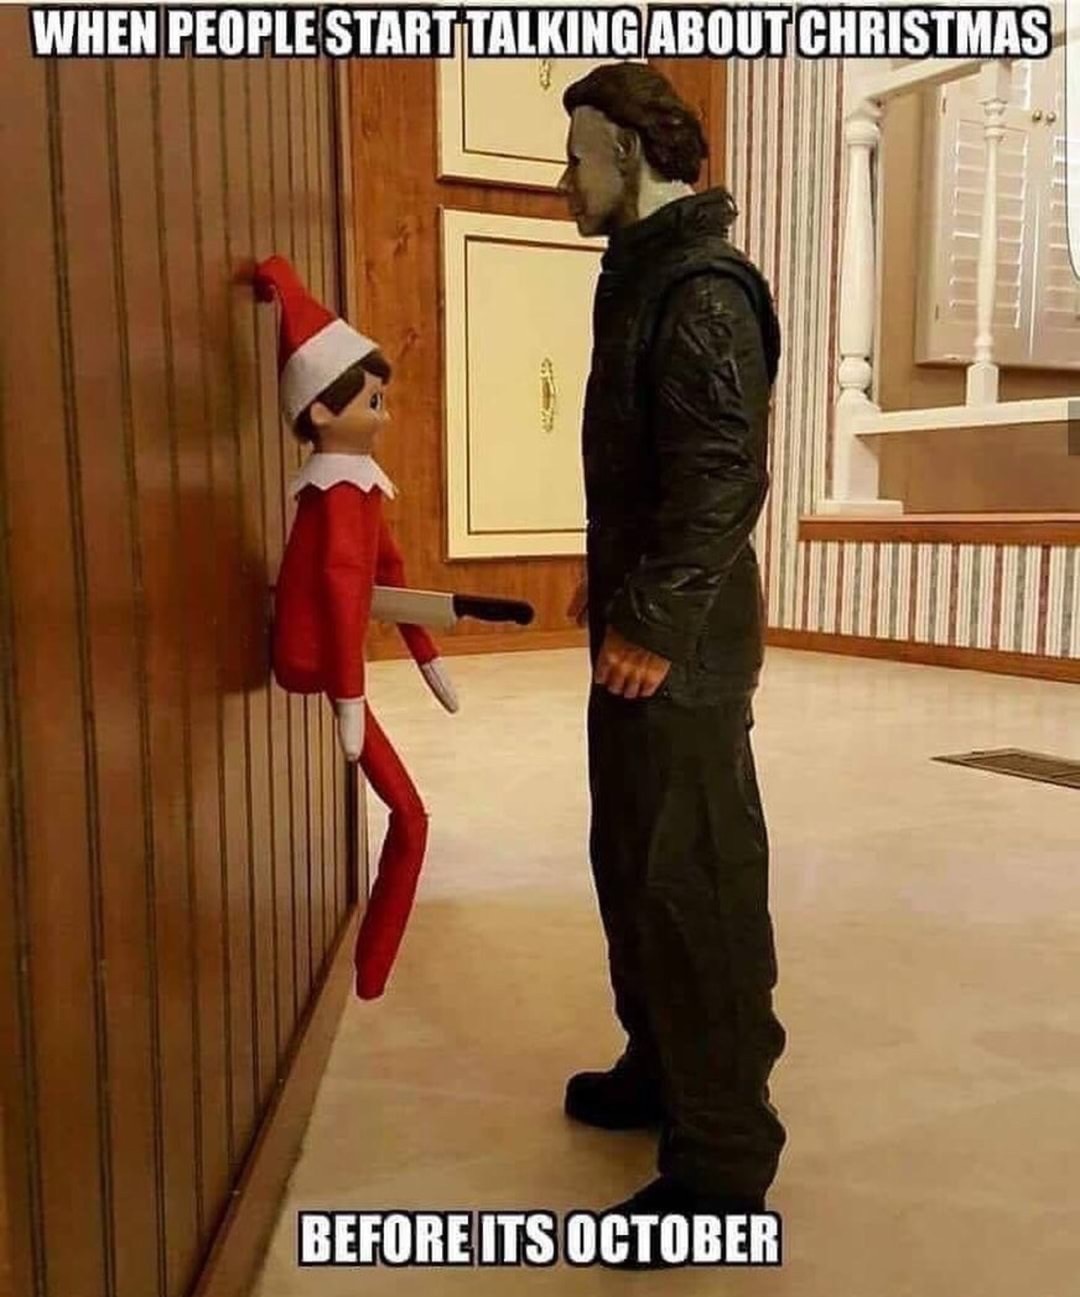 memes - michael myers elf on the shelf meme - When People Start Talking About Christmas Before Its October